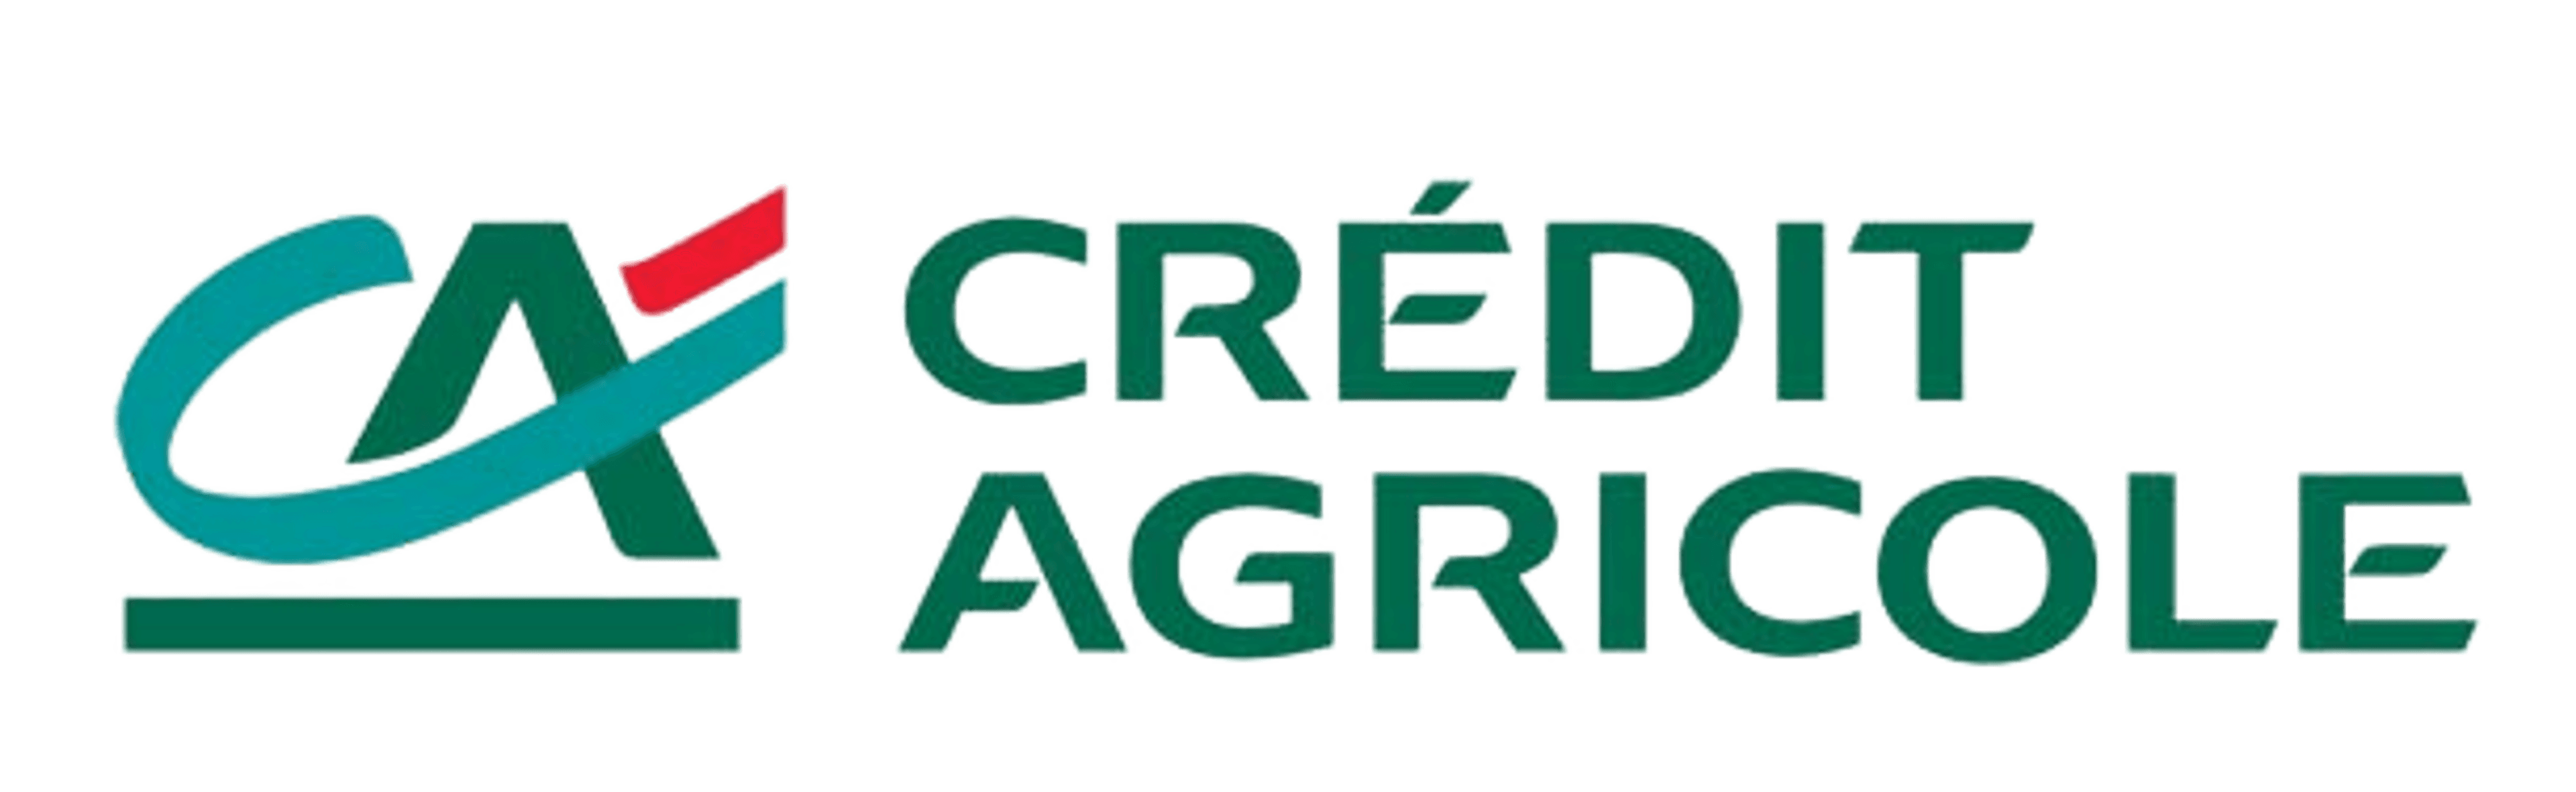 footer.payments.credit_agricole